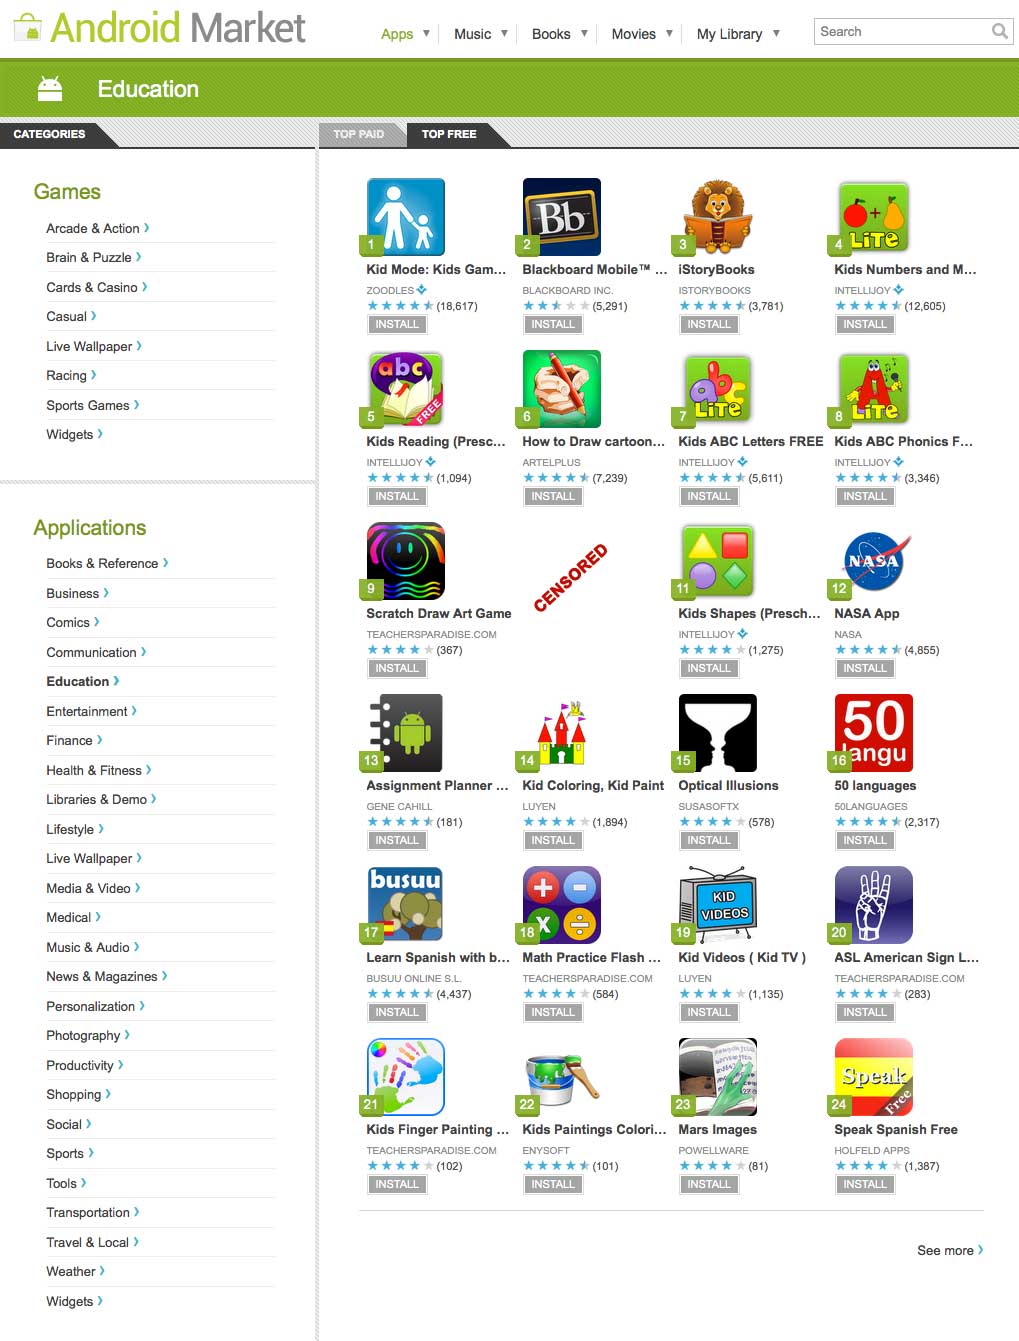 ... Technology (UCET): Top Free Educational Apps in the Android Market